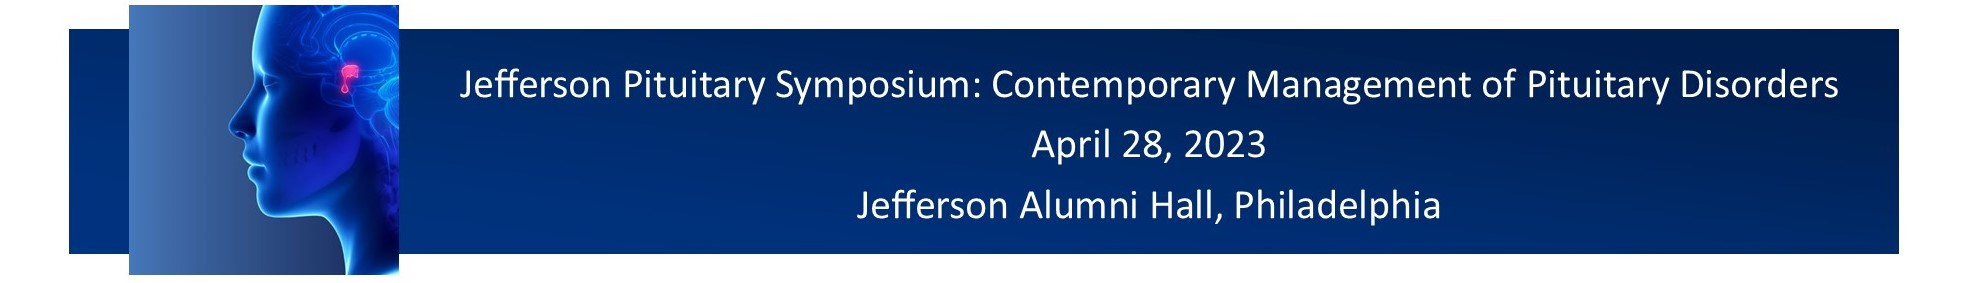 Jefferson Pituitary Symposium: Contemporary Management of Pituitary Disorders Banner